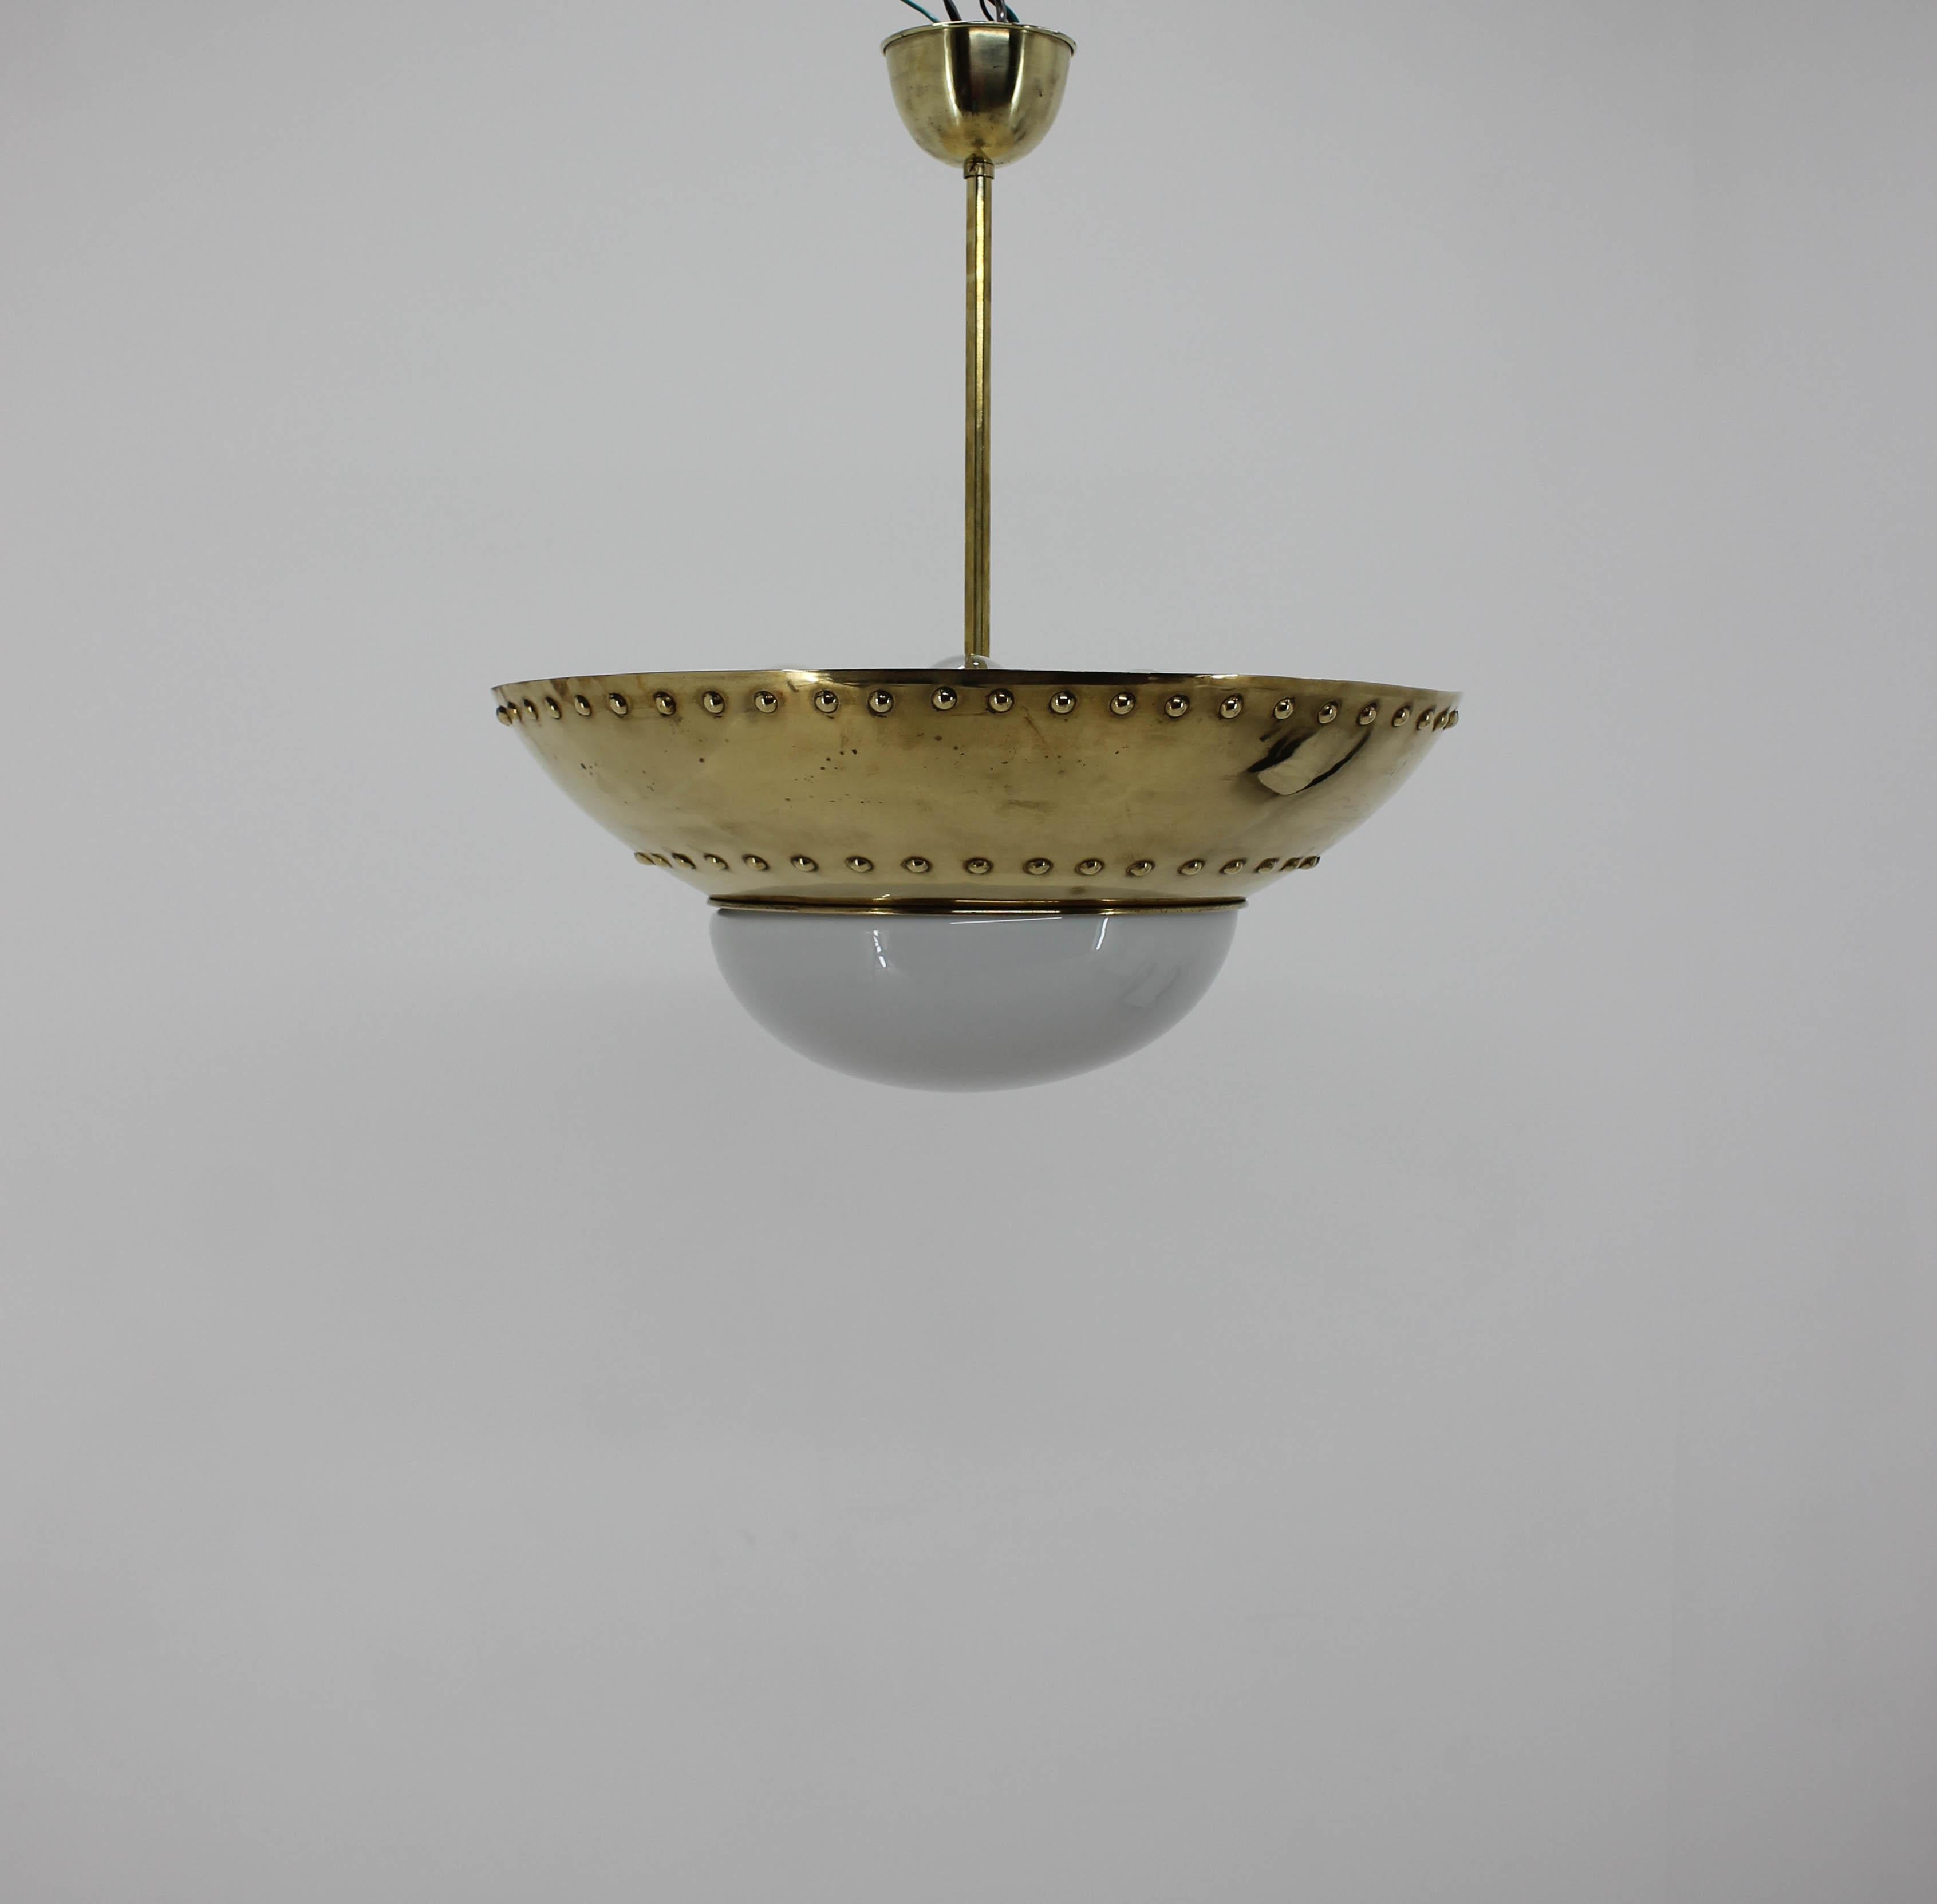 Czech Unique Brass Chandelier by Franta Anyz, 1920s, Up to Two Items